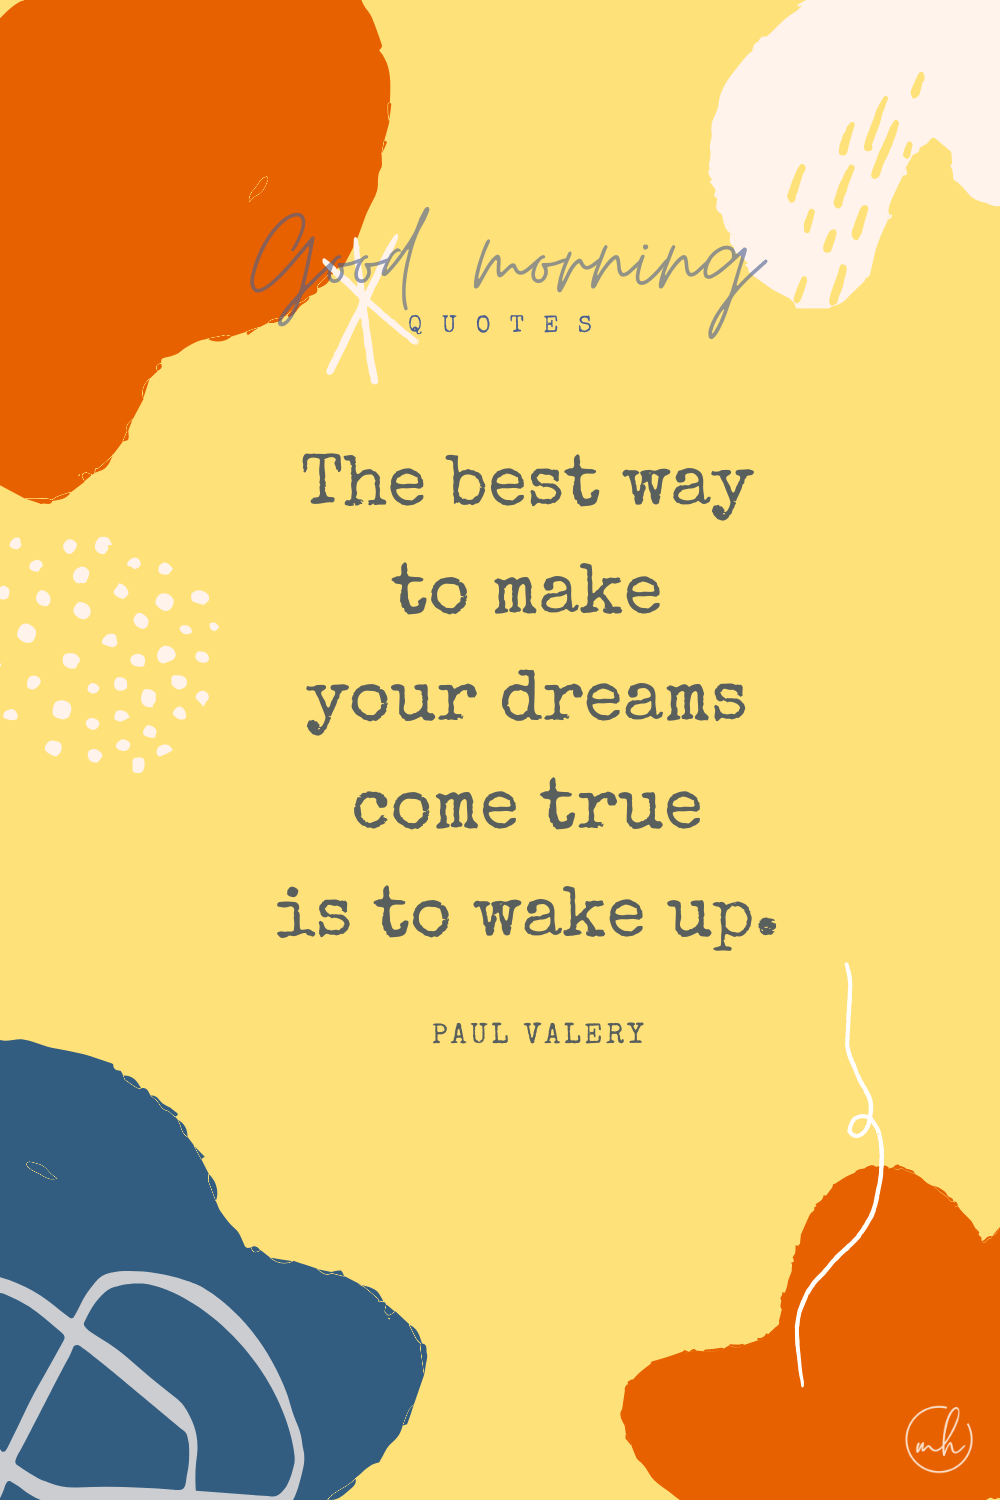 "The best way to make your dreams come true is to wake up." - Paul Valery